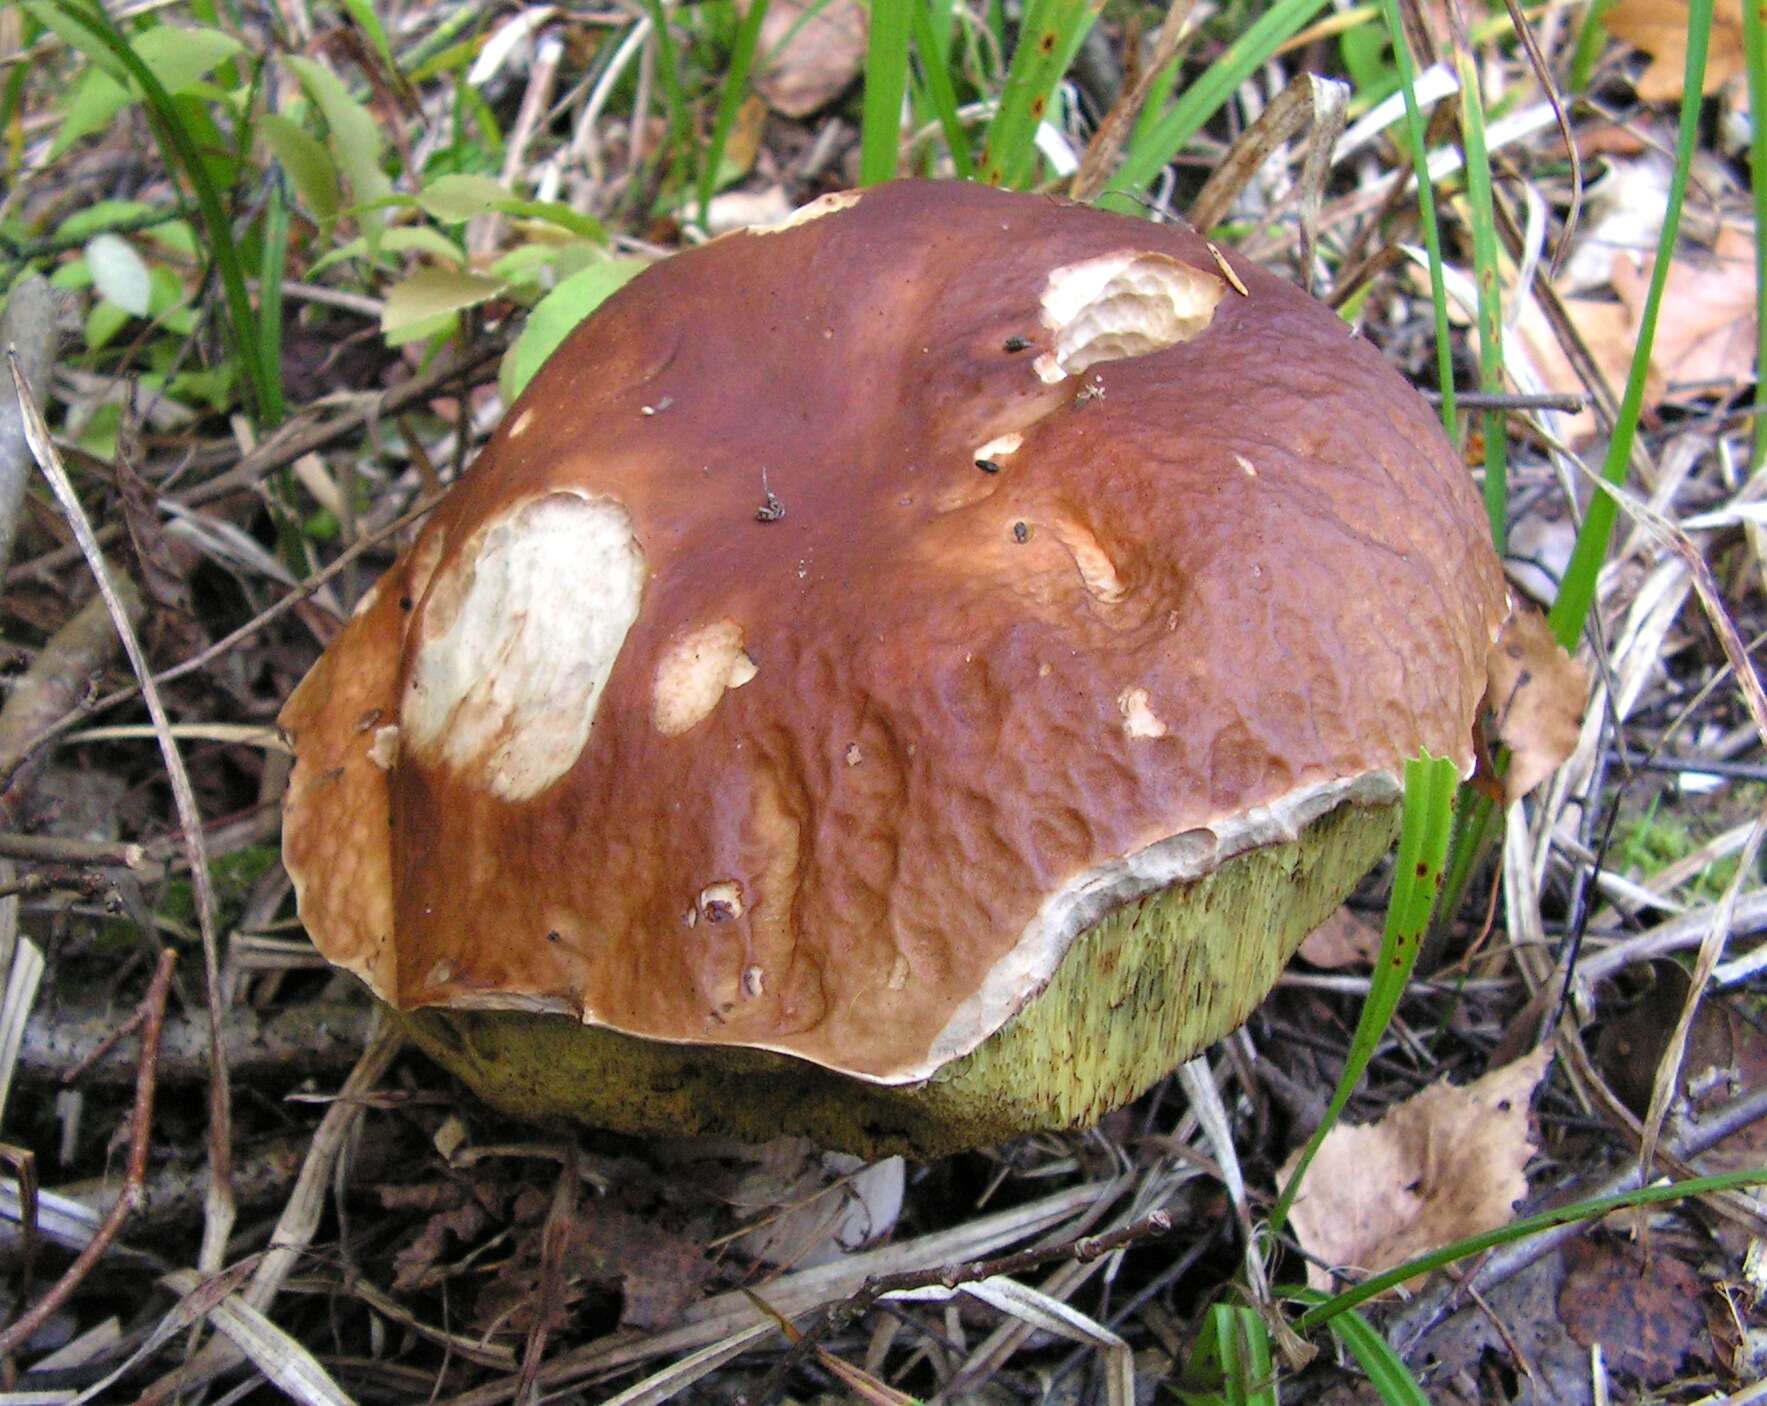 Image of Cep